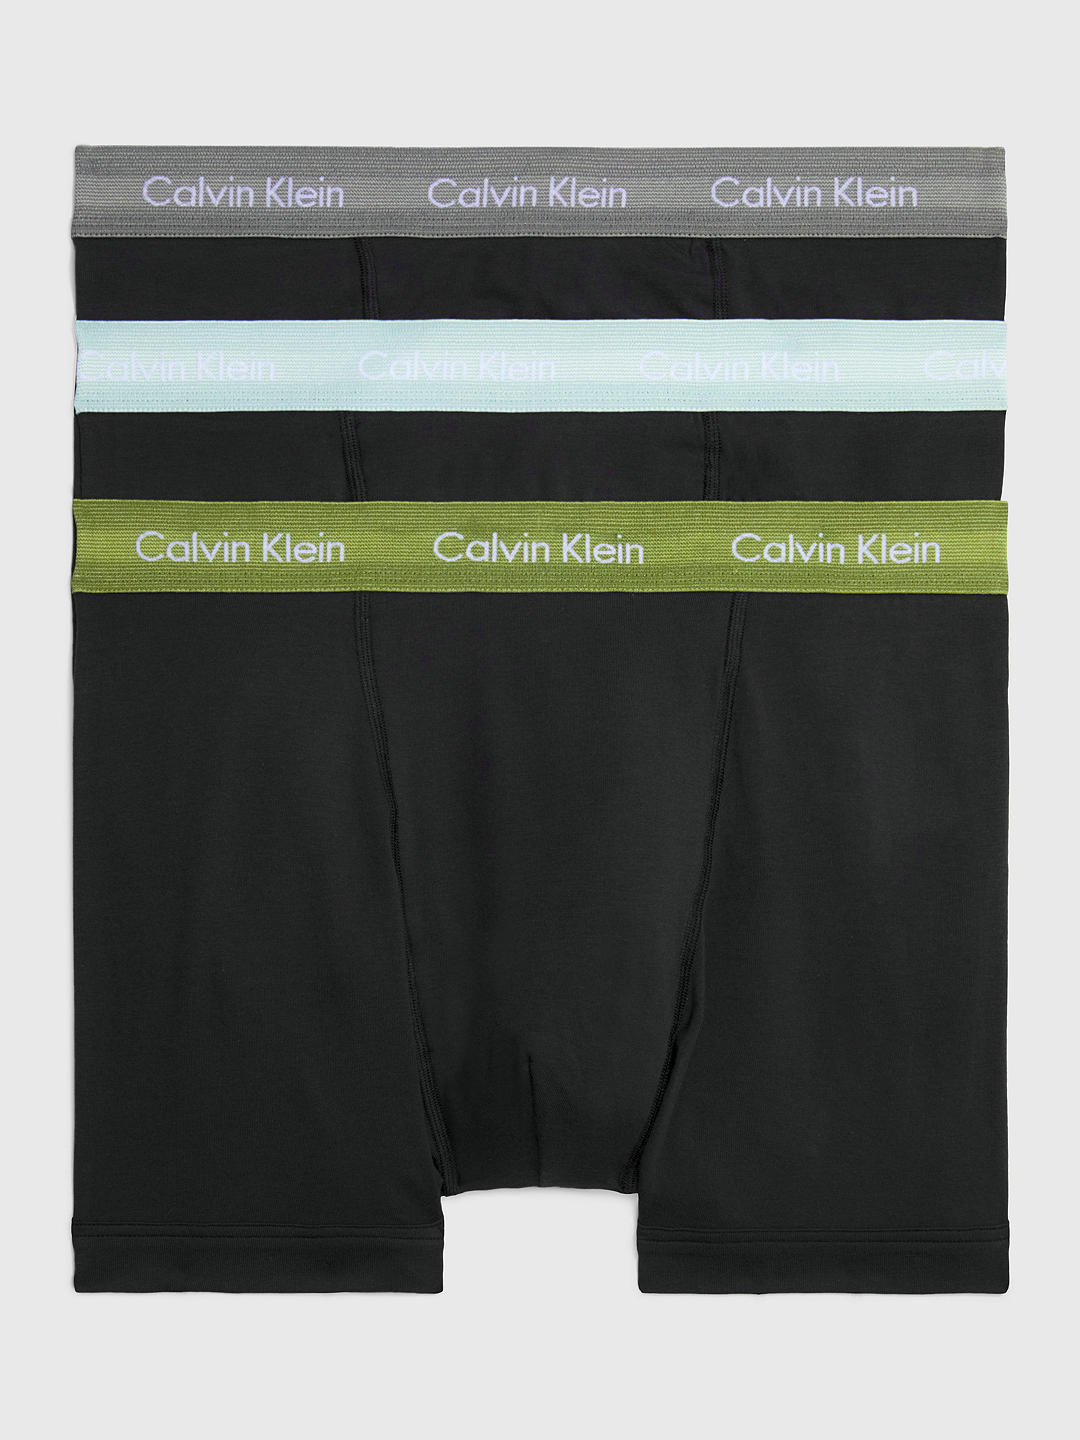 Calvin Klein Cotton Stretch Mid Rise Trunks, Pack of 3, Black/Olive/Grey